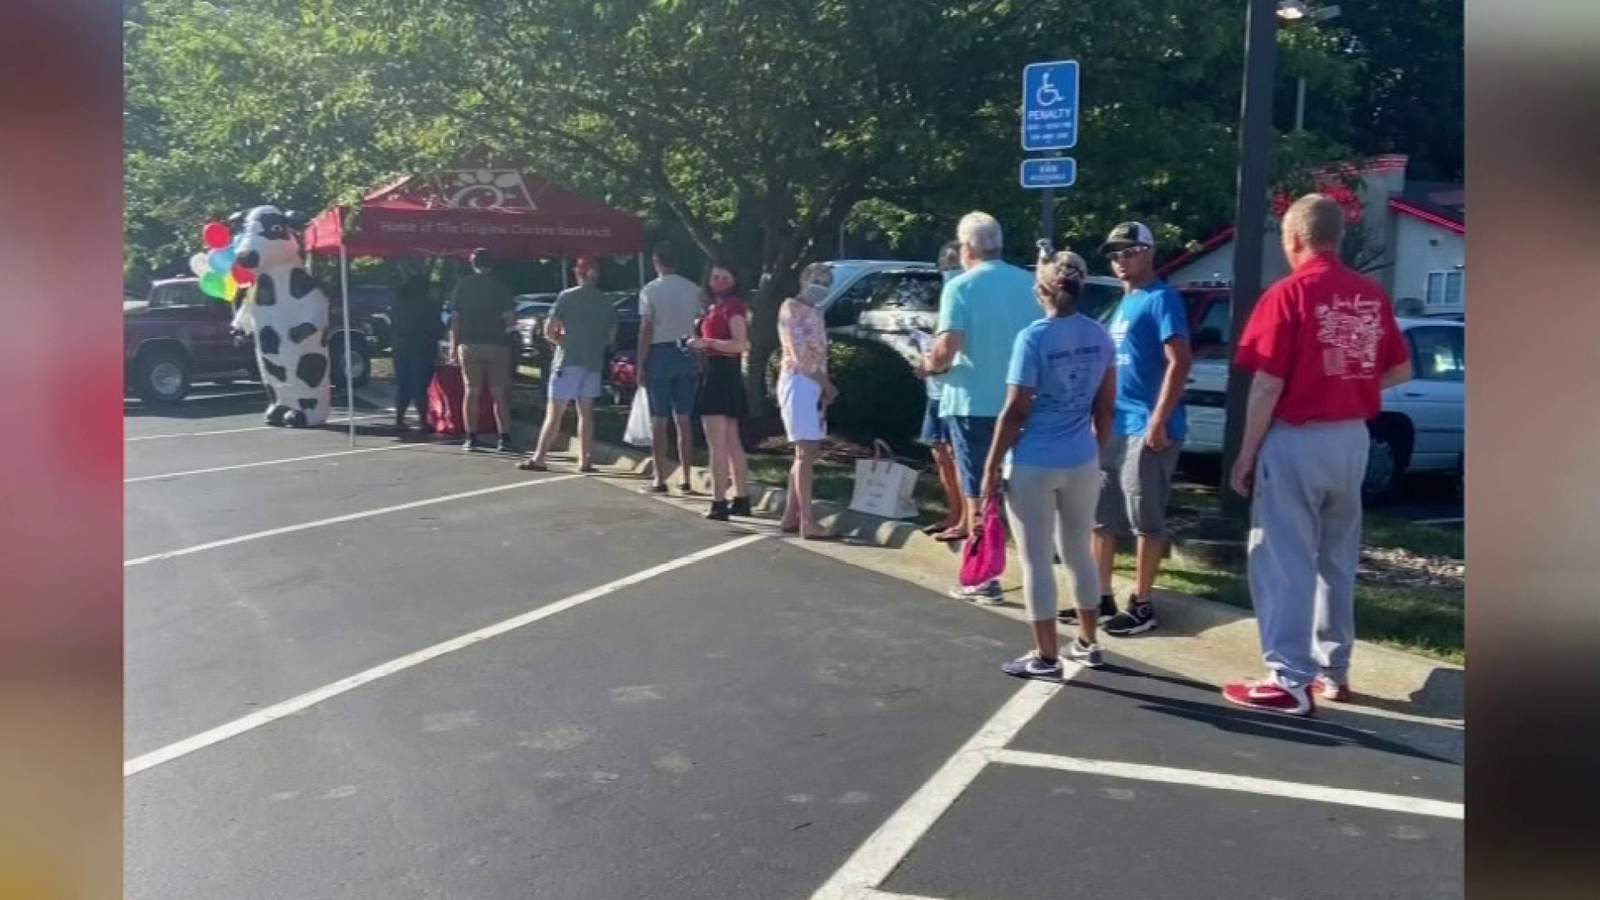 Lynchburg Chick-fil-A sees overwhelming support for coin collection event